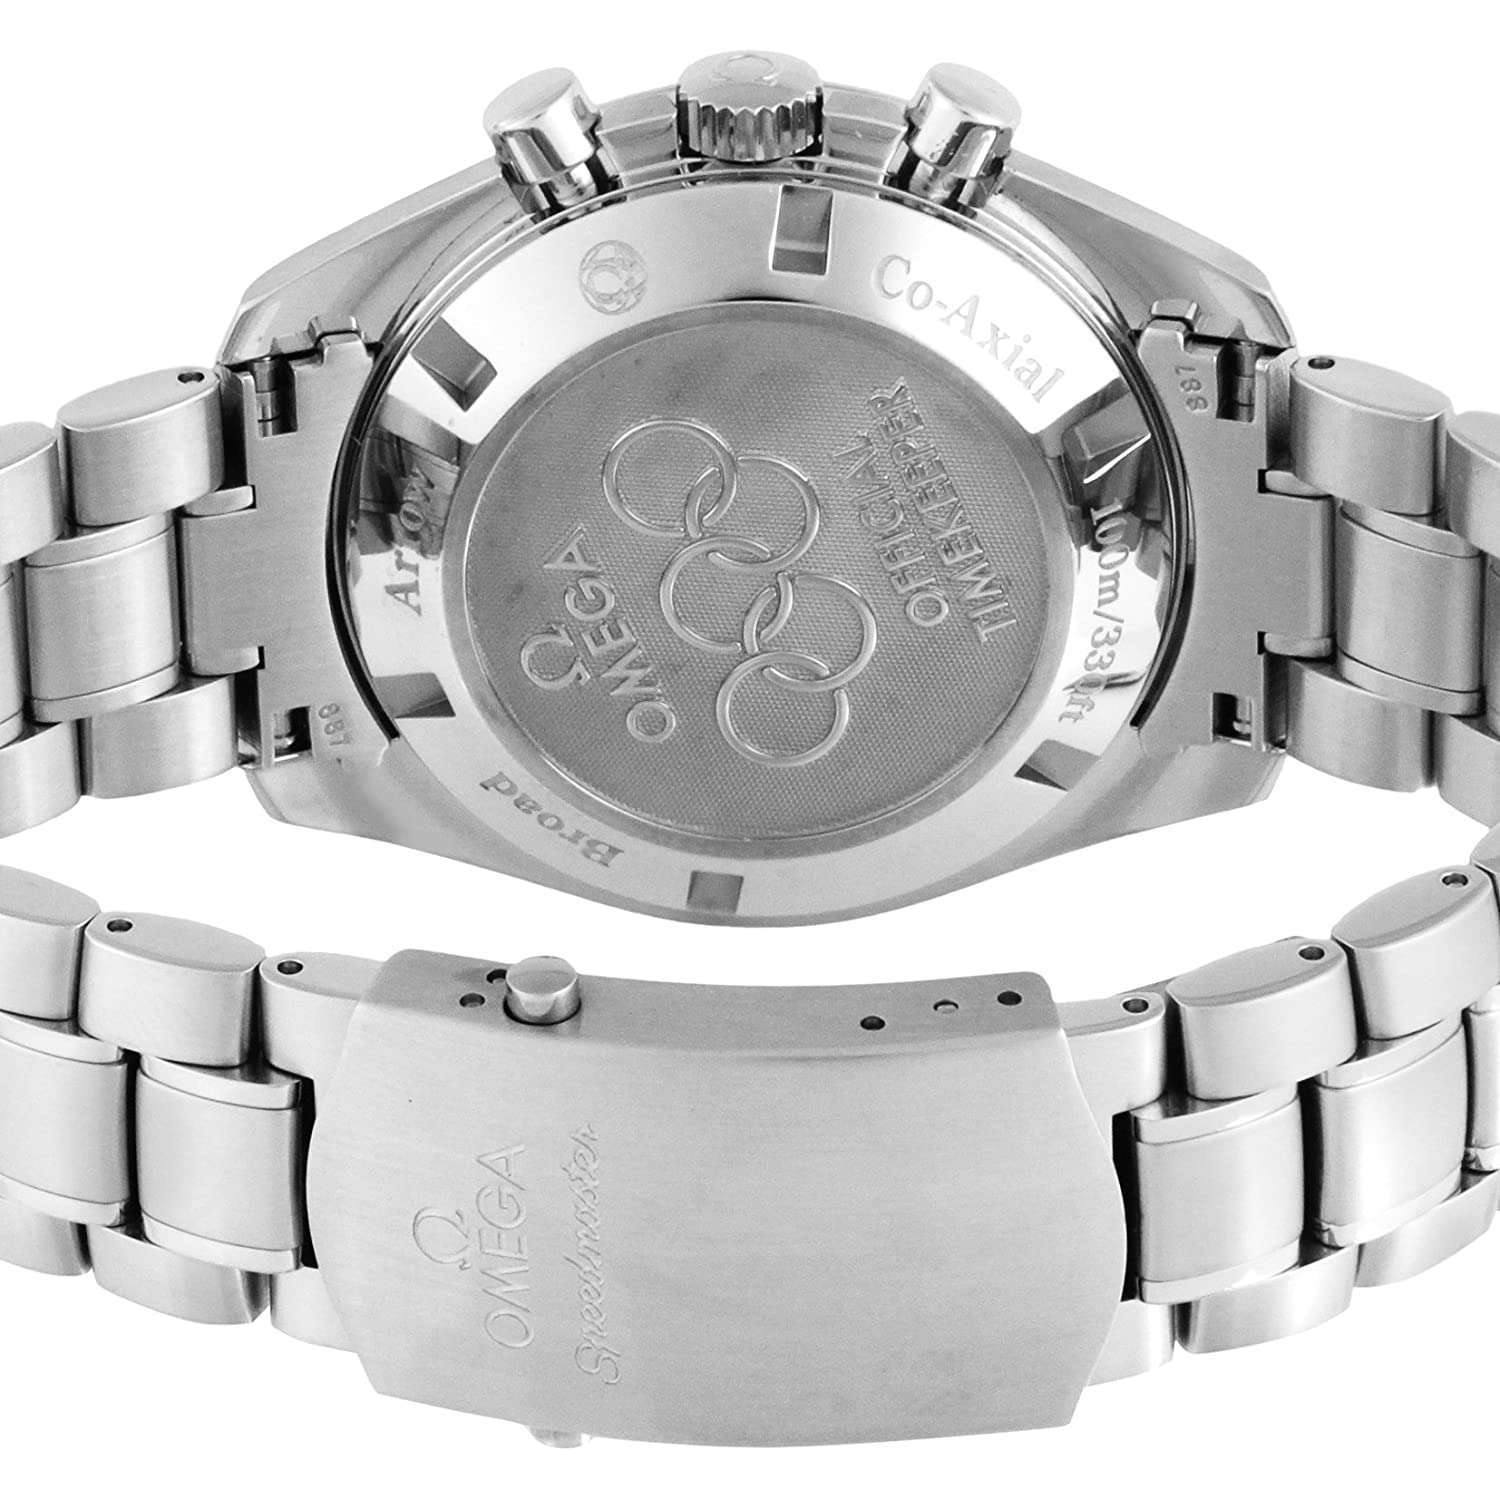 ROOK JAPAN:OMEGA SPEEDMASTER OLYMPIC GAMES 42 MM MEN WATCH (LIMITED EDITION) 321.10.42.50.04.001,Luxury Watch,Omega